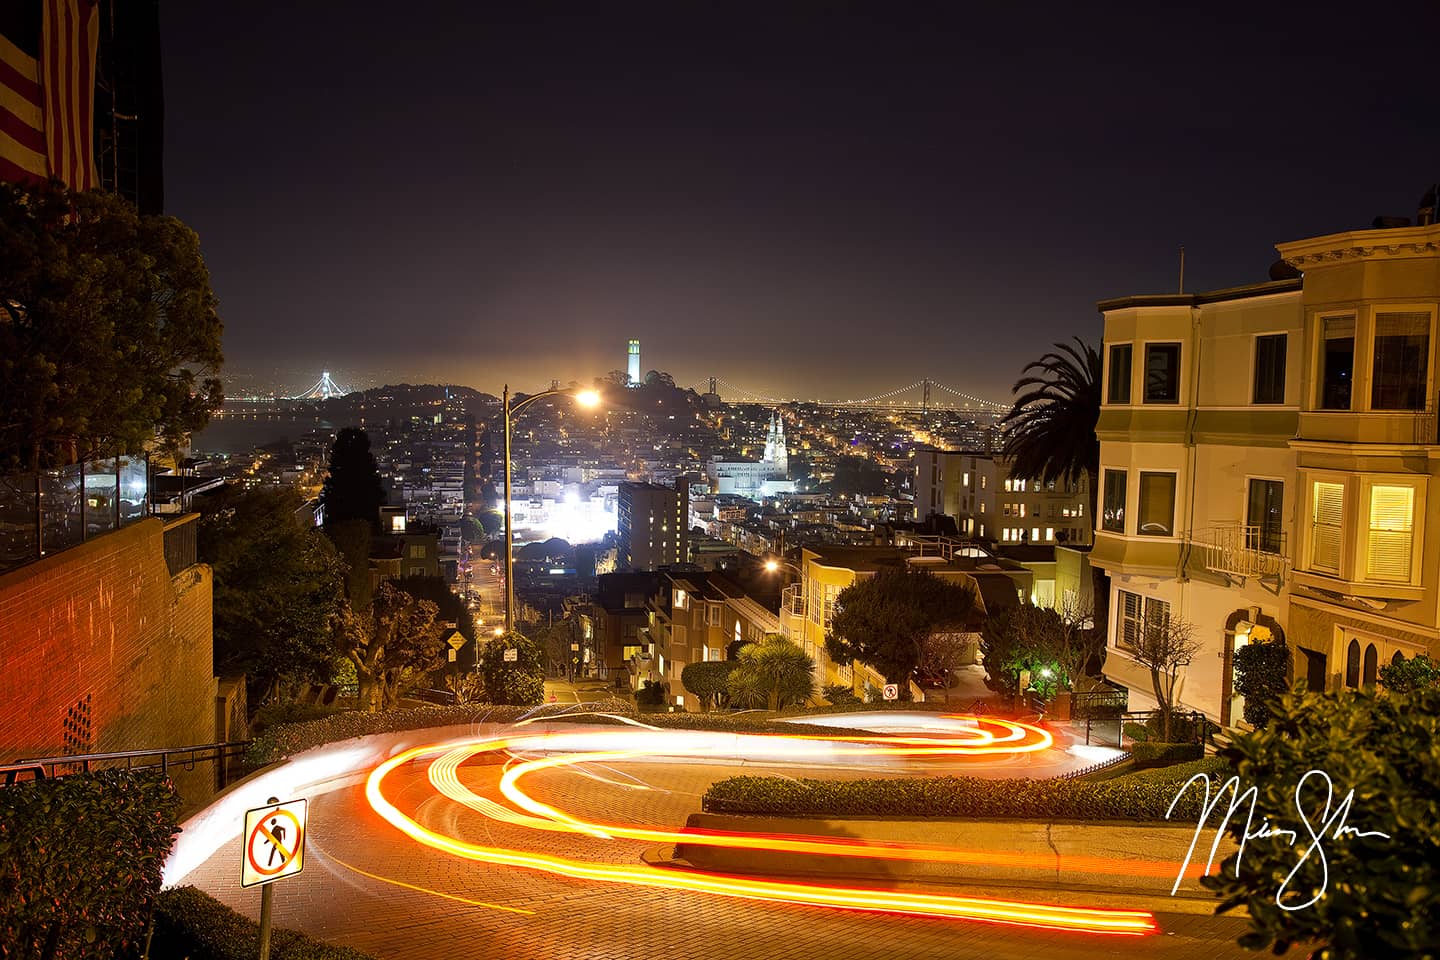 The Lights of Lombard Street